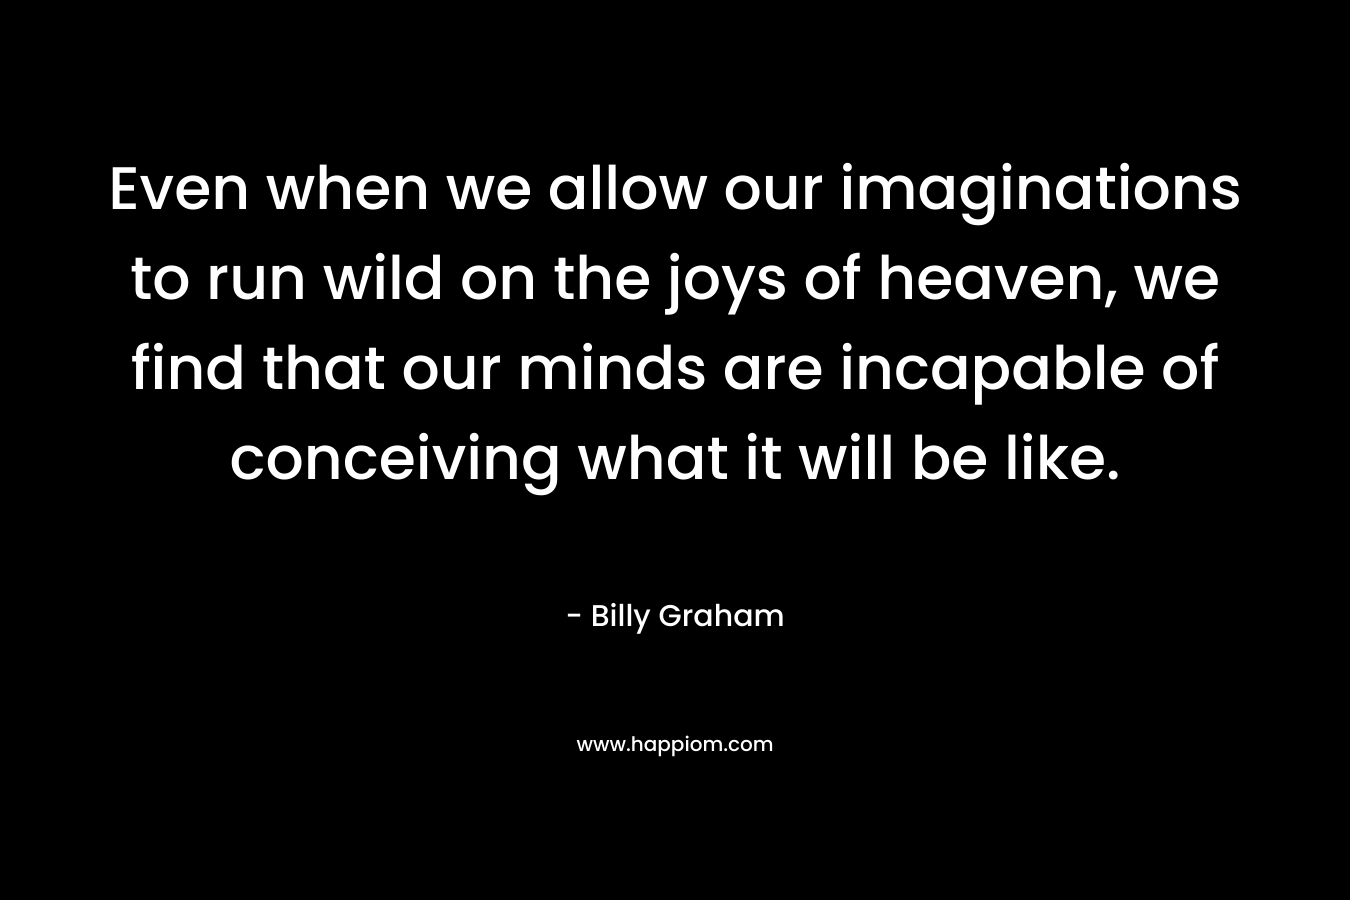 Even when we allow our imaginations to run wild on the joys of heaven, we find that our minds are incapable of conceiving what it will be like.